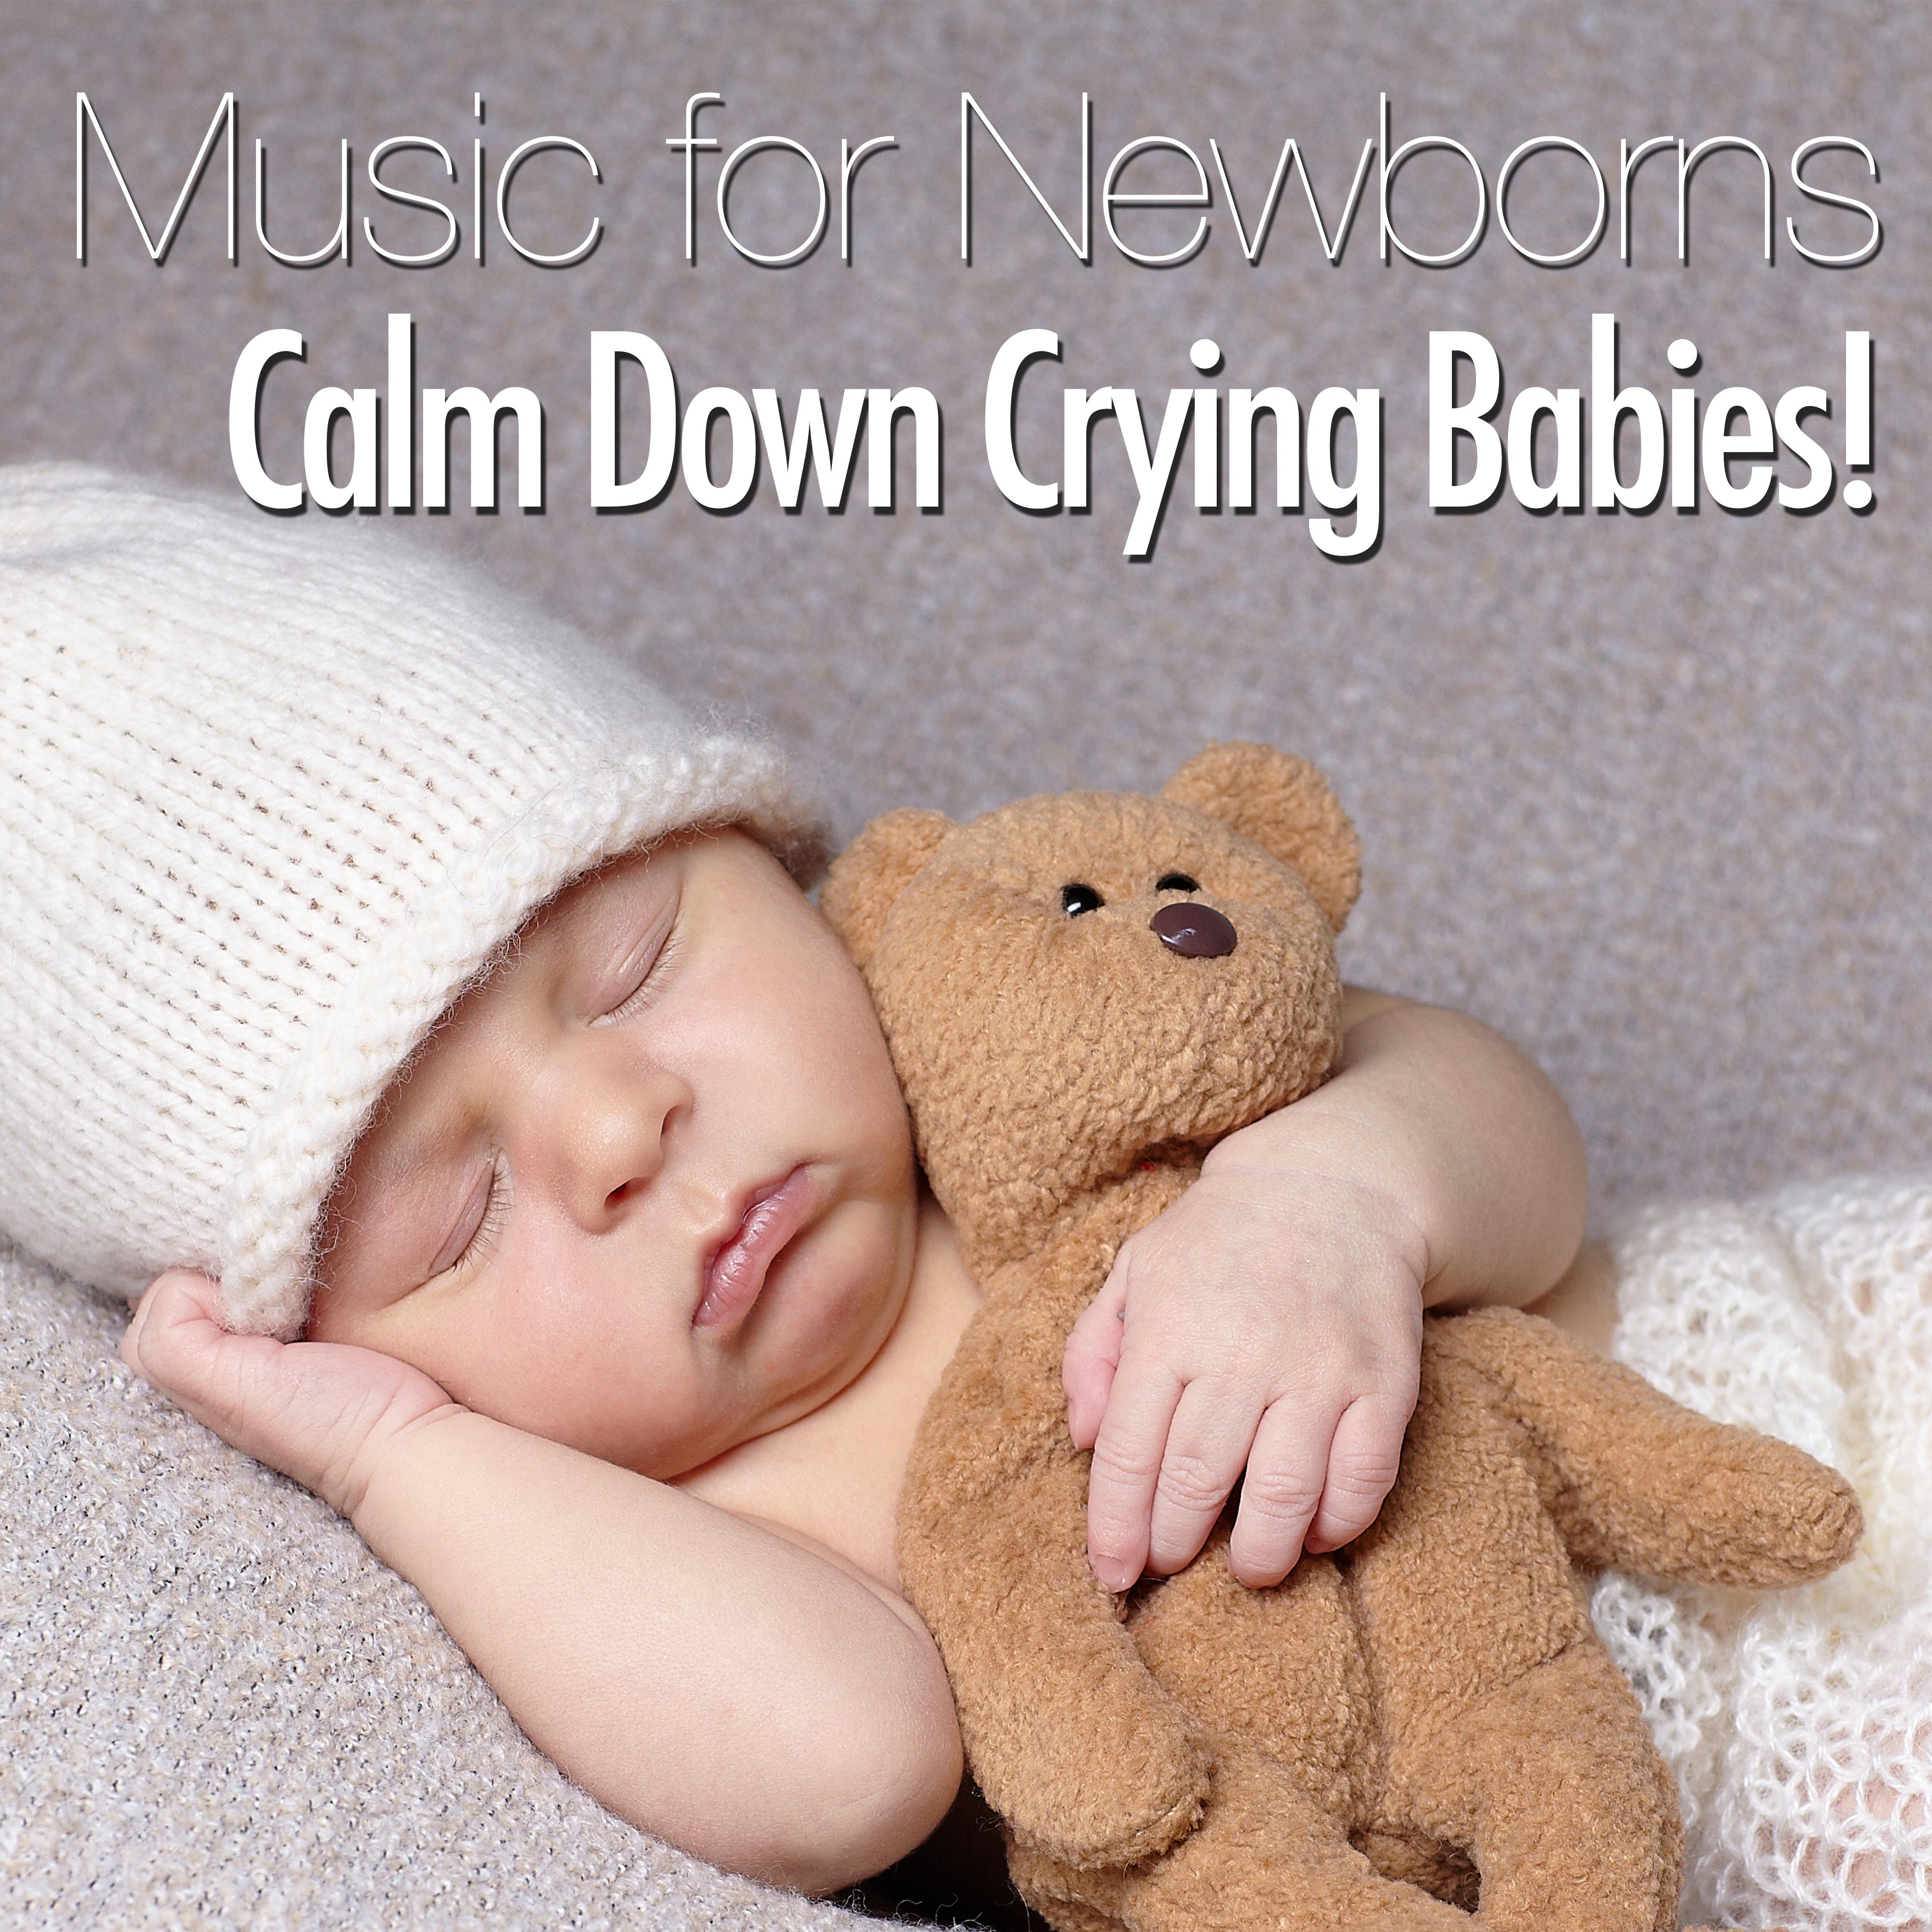 Calm Down Crying Babies! - The Most Relaxing Music for Newborns in a Carefully Designed Playlist for Pregnant Mothers, Toddlers or Babies to Help Relax and Sleep Well Through the Night